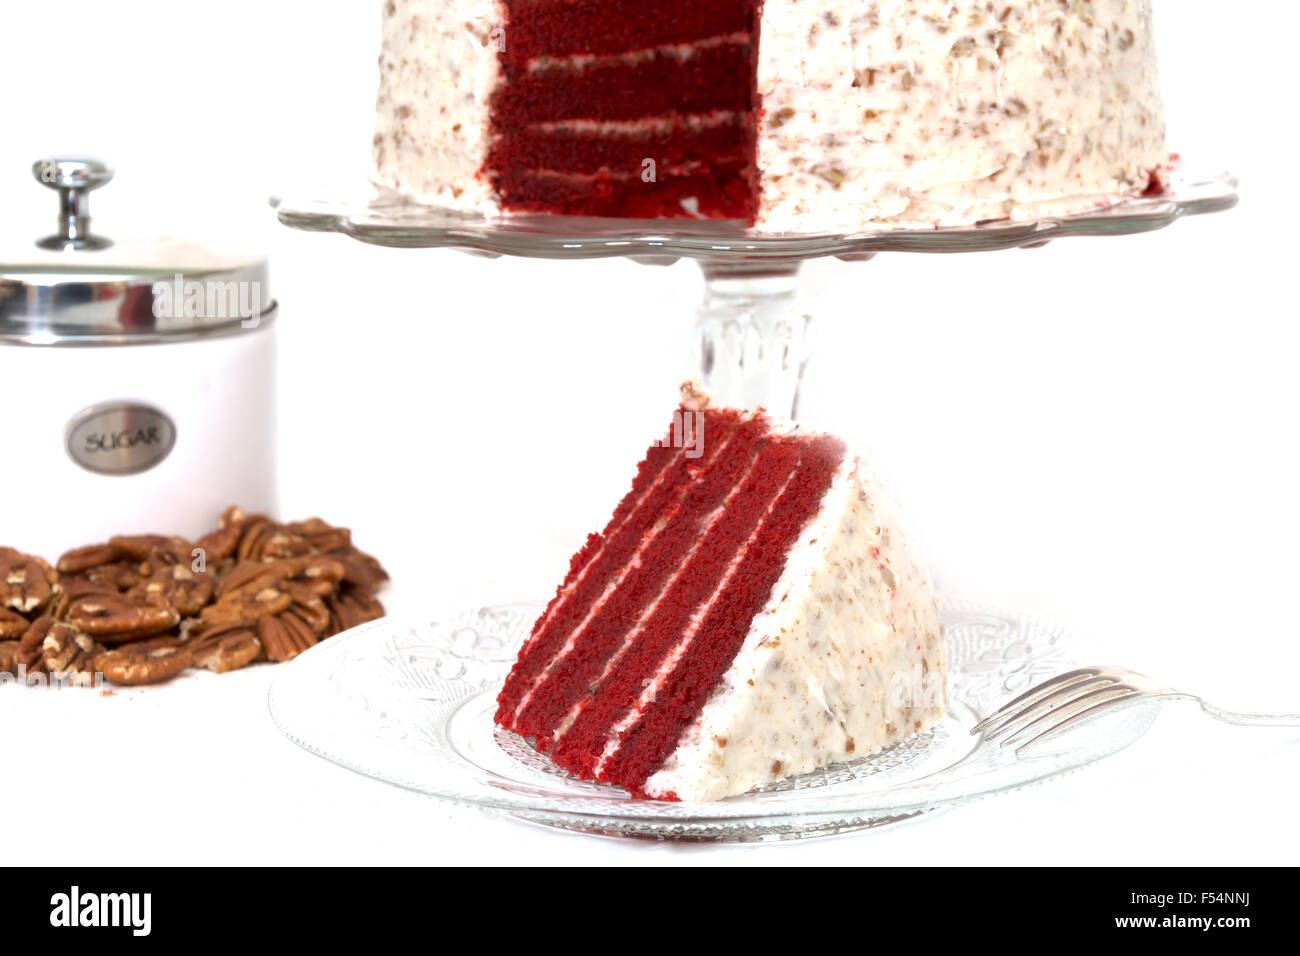 Slice of red velvet cake  along with sliced pecans and sugar canister.  Isolated on white background. Stock Photo